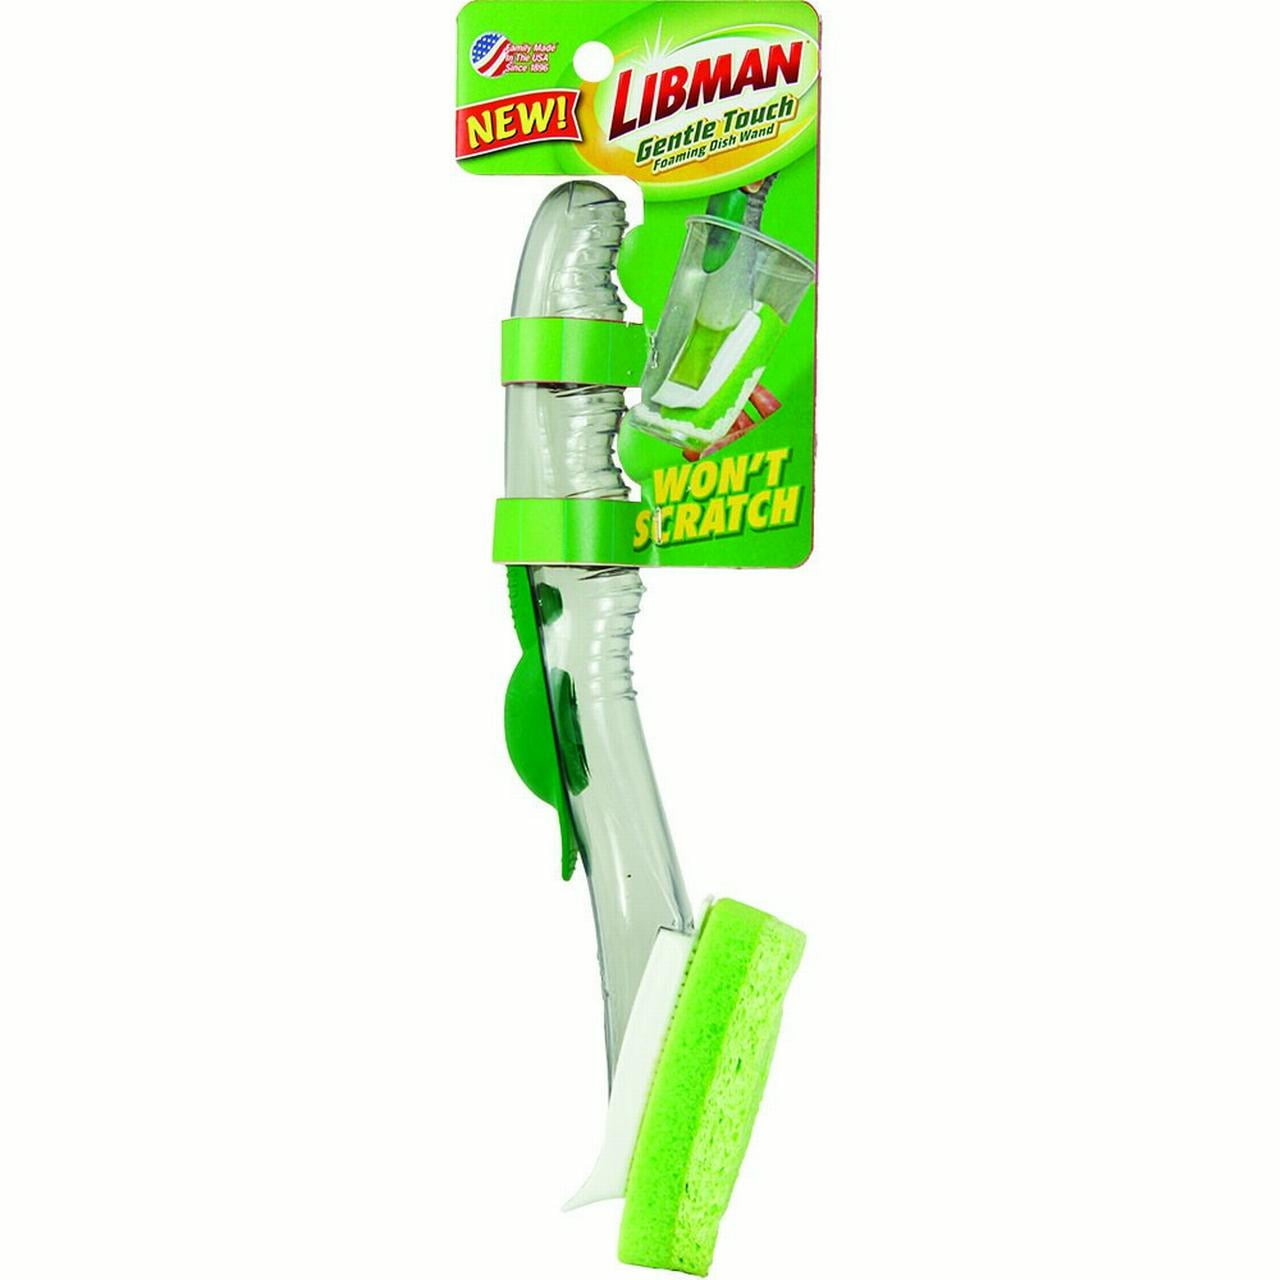 Libman® Cellulose Soap Dispensing Dish Wand Refill, 1 ct - City Market